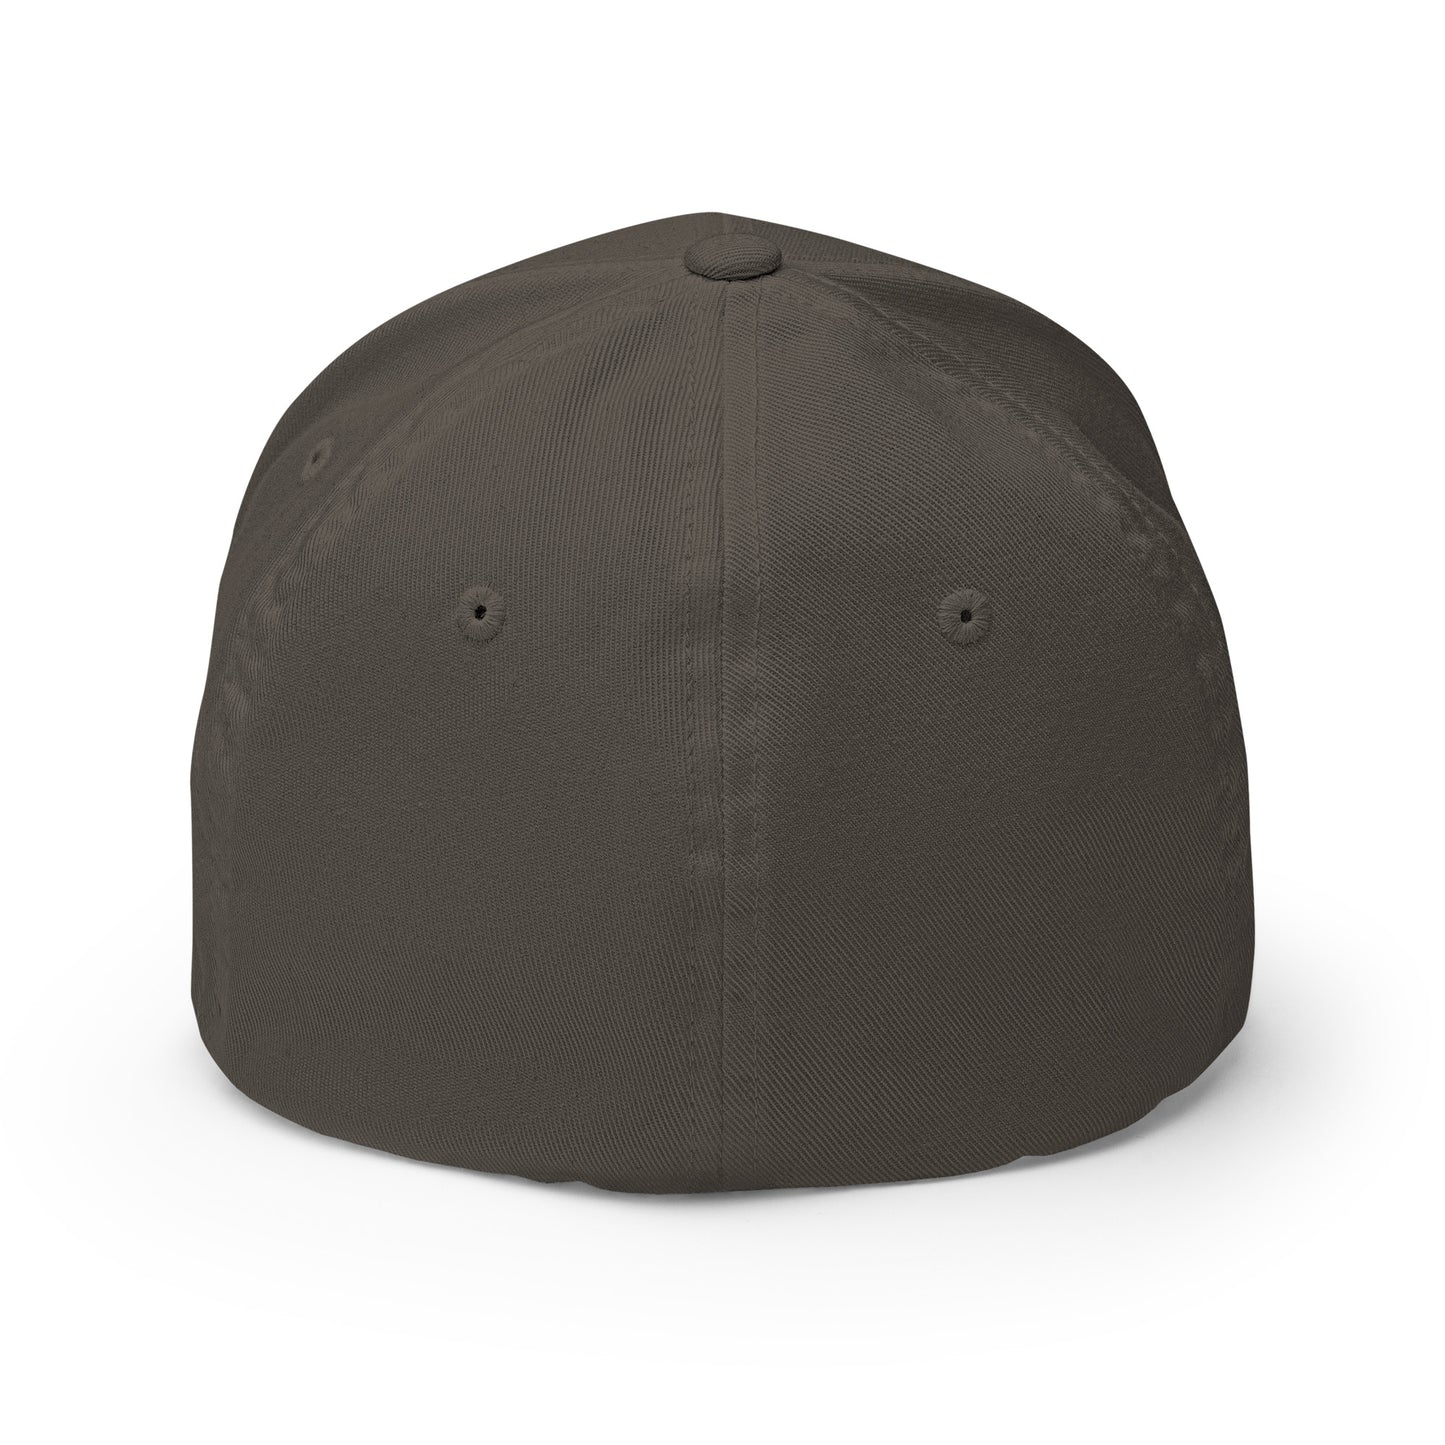 Baseball Cap with Sunny Clouds Symbol